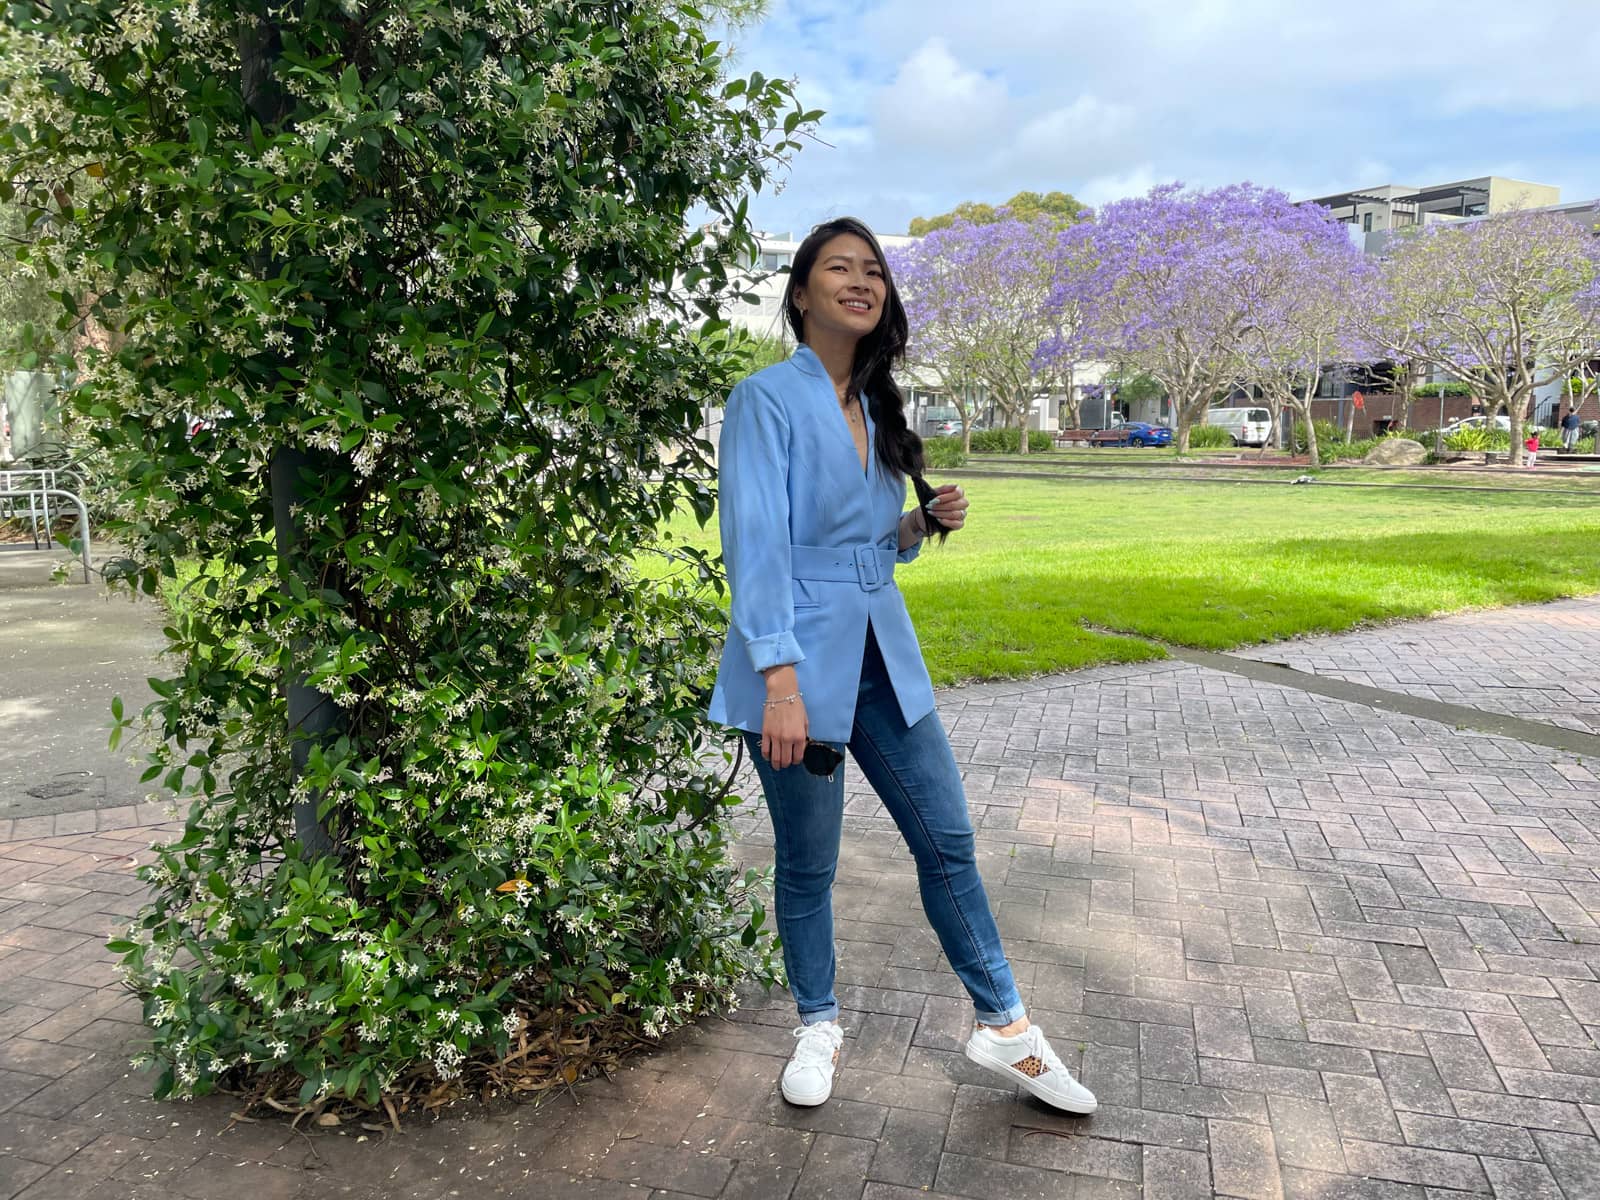 A woman with fair skin and long dark hair braided loosely in a side braid, which she is clutching with one hand. She is wearing a light blue blazer and blue jeans with white sneakers. She is standing at the side of an open park and there is a wire pillar next to her covered in leaves